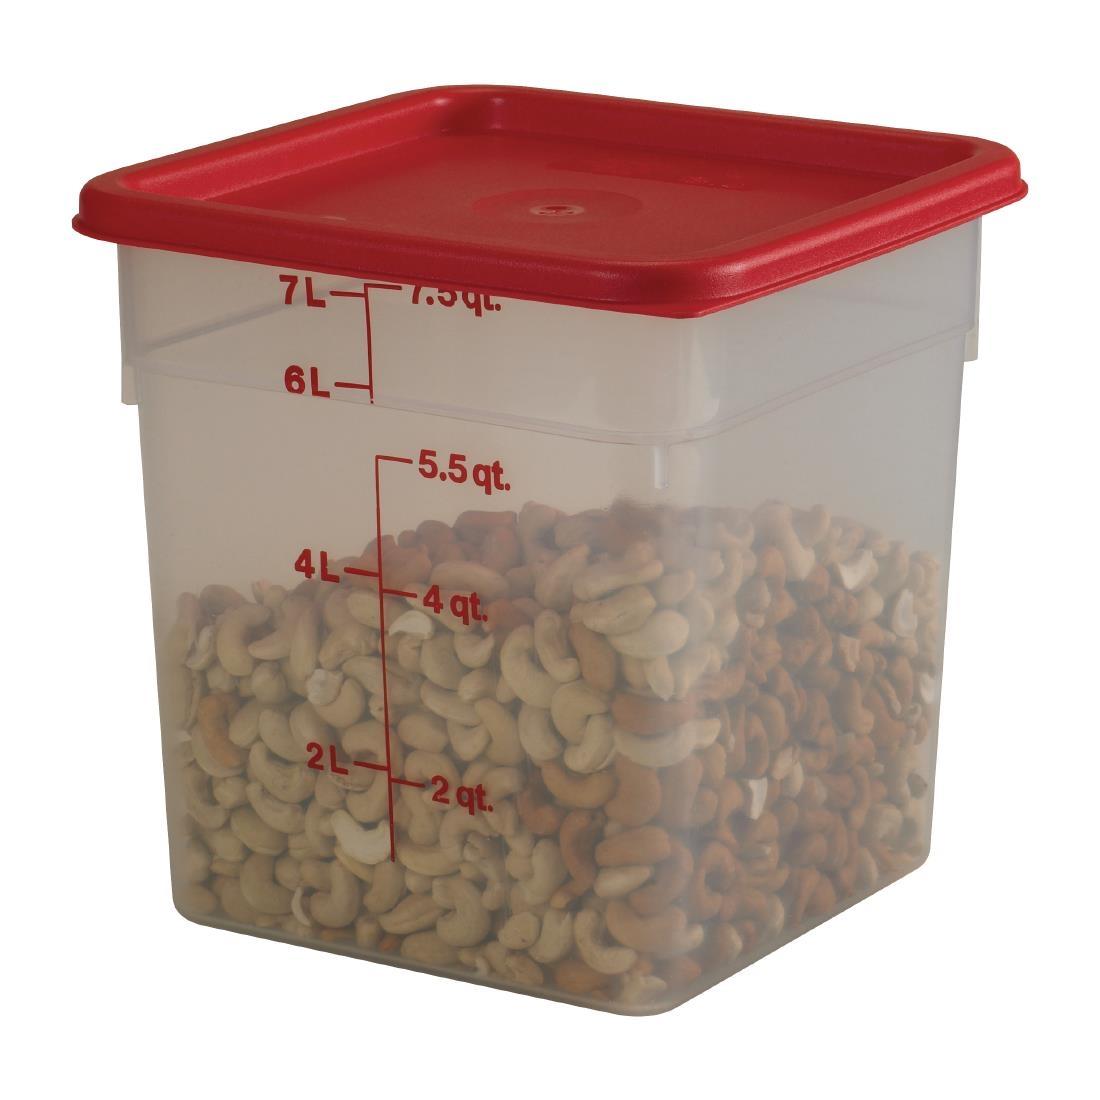 Cambro Camsquare Food Storage Container Lid Red - DB015  - 3